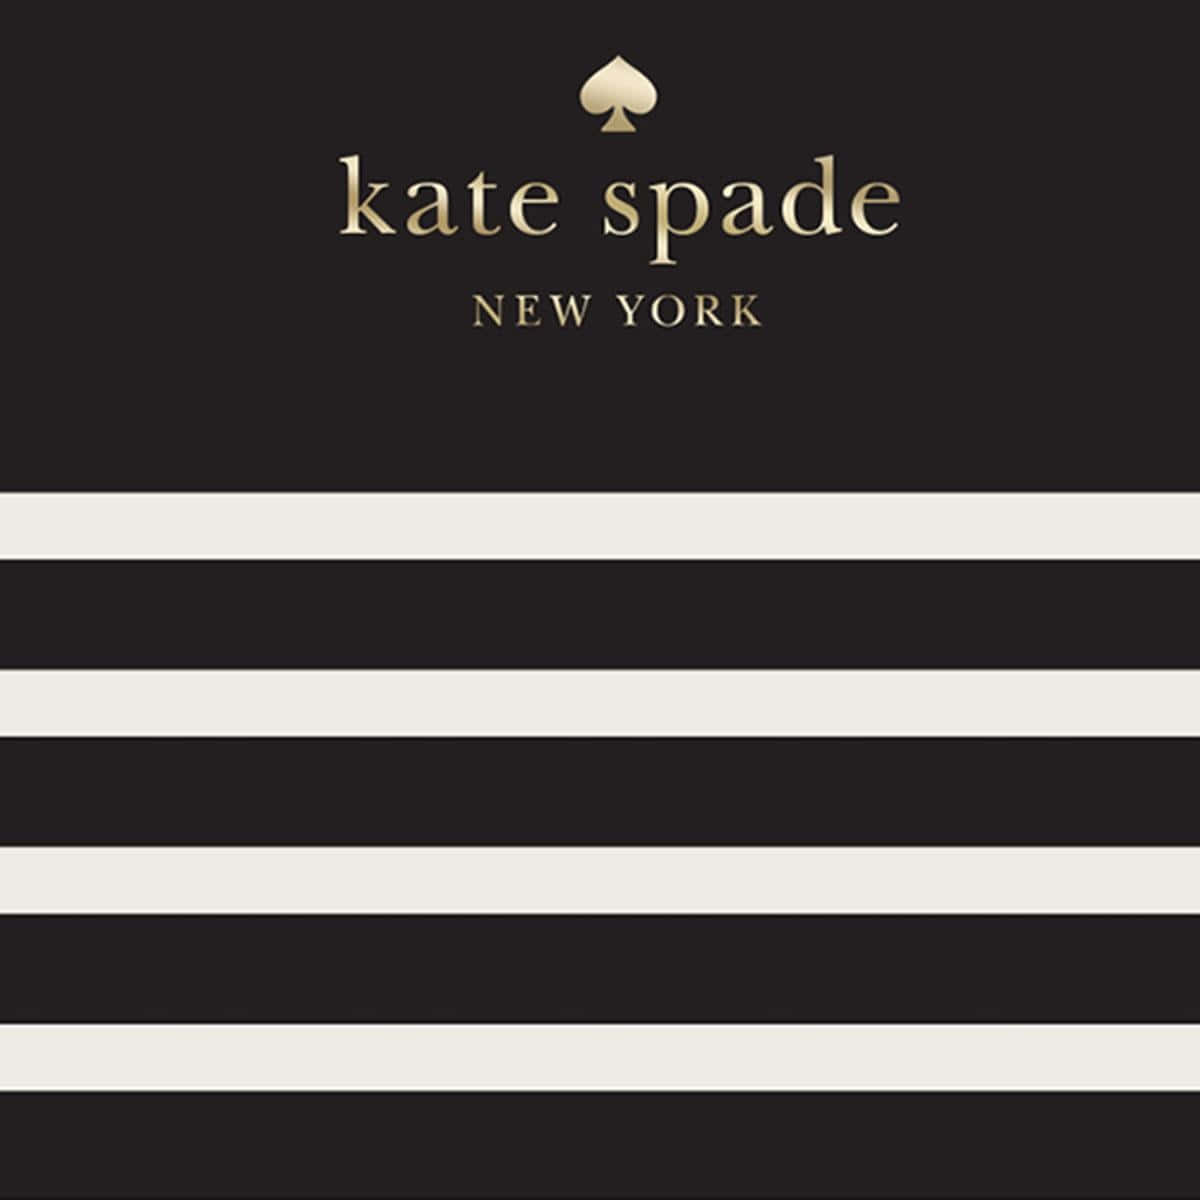 Make Every Day a Little Bit Brighter with Kate Spade!